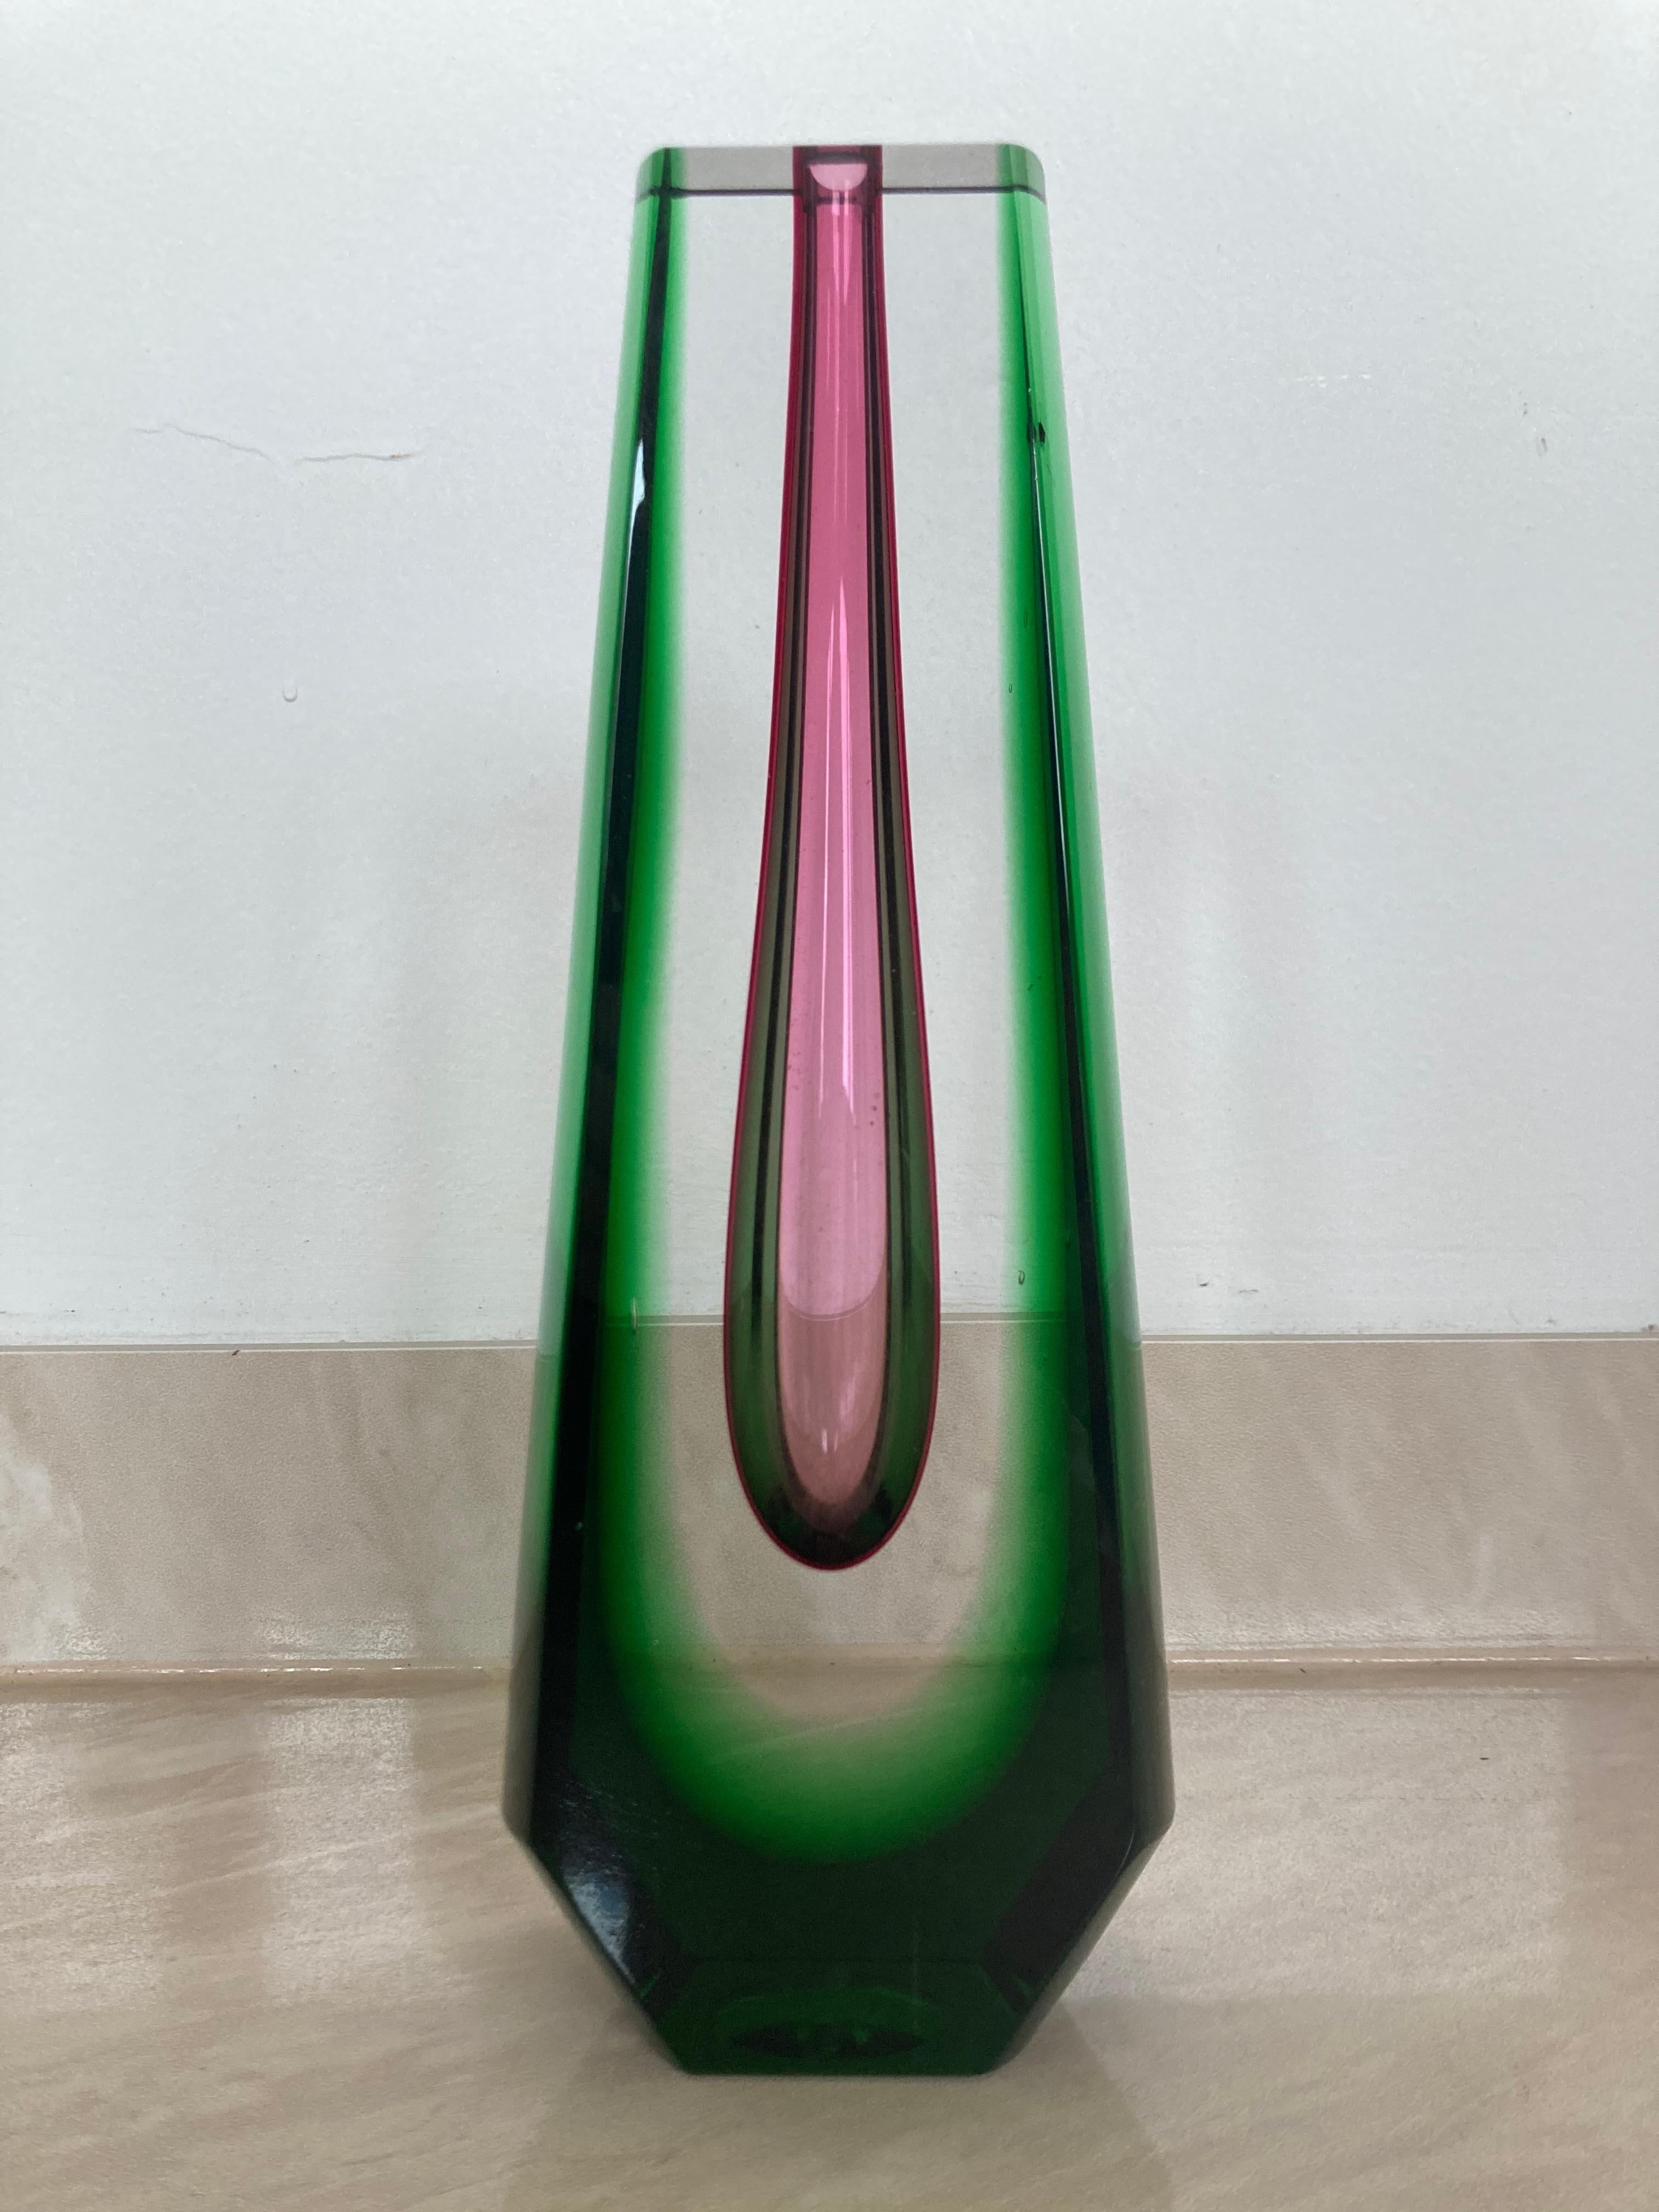 - 1970s, called
- One of the most famous Czech designers
- Very popular one flower vase
- Cut and polished glass.